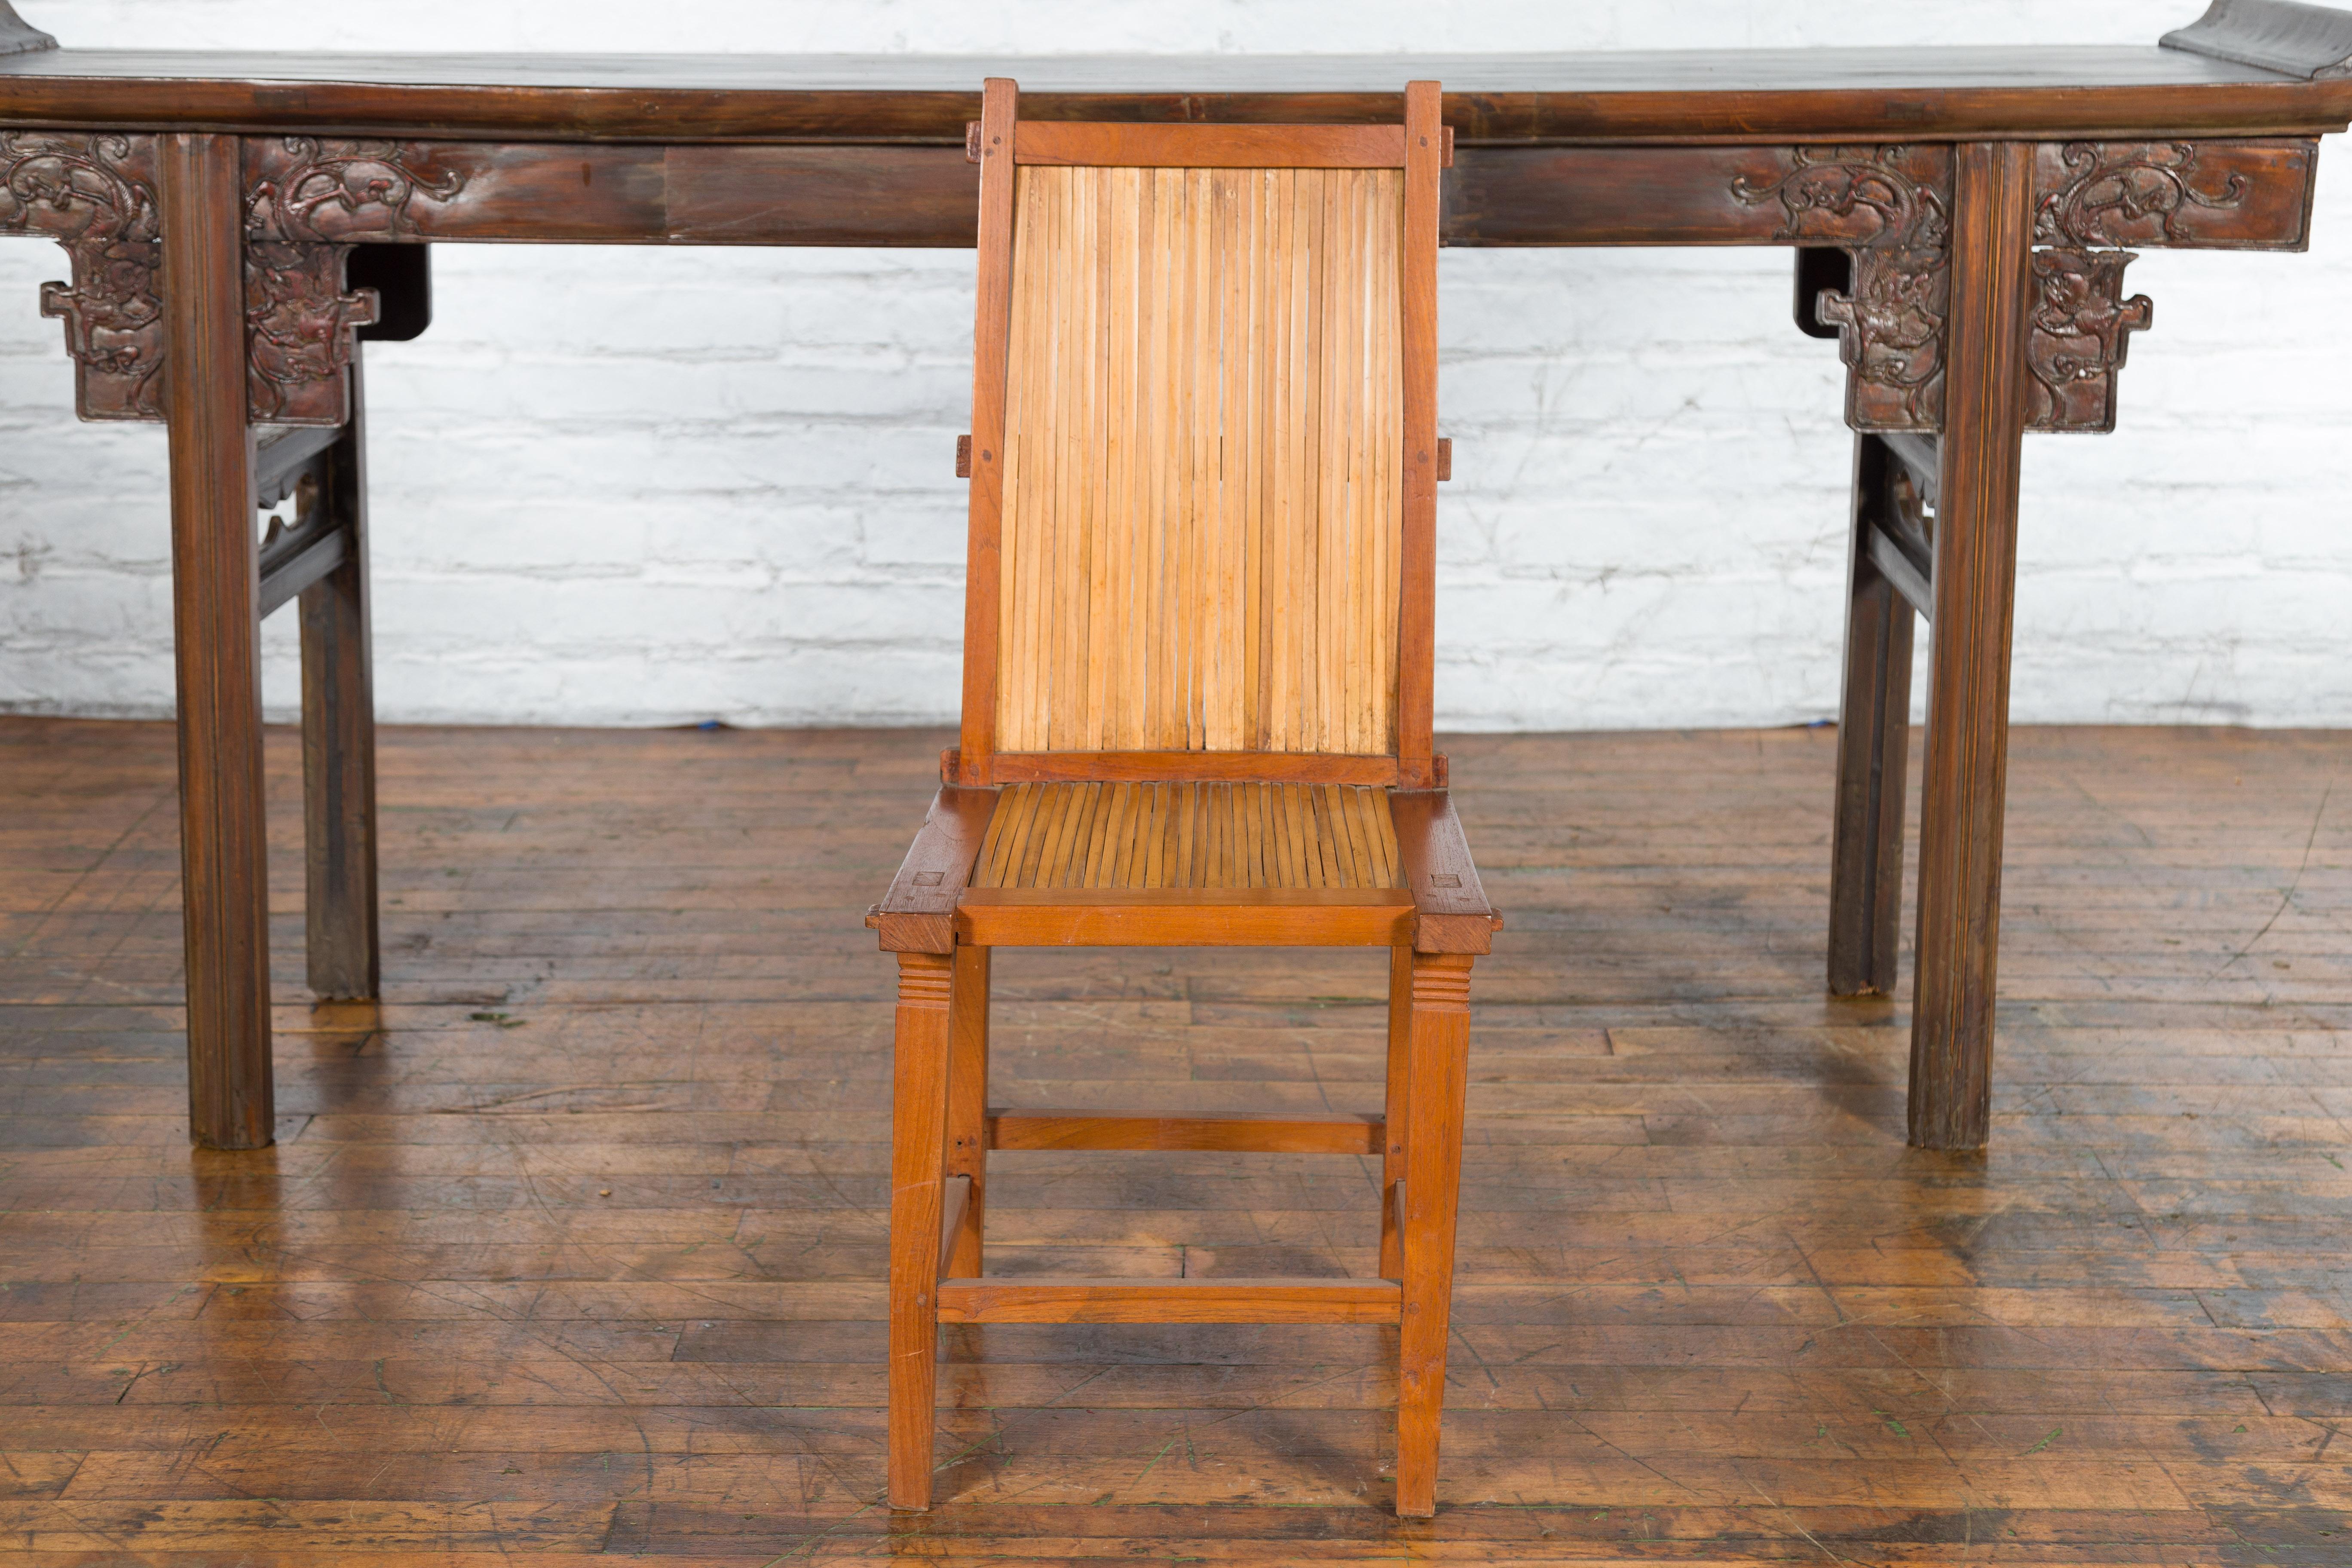 20th Century Rustic Javanese Vintage Wooden Side Chair with Slatted Bamboo Back and Seat For Sale